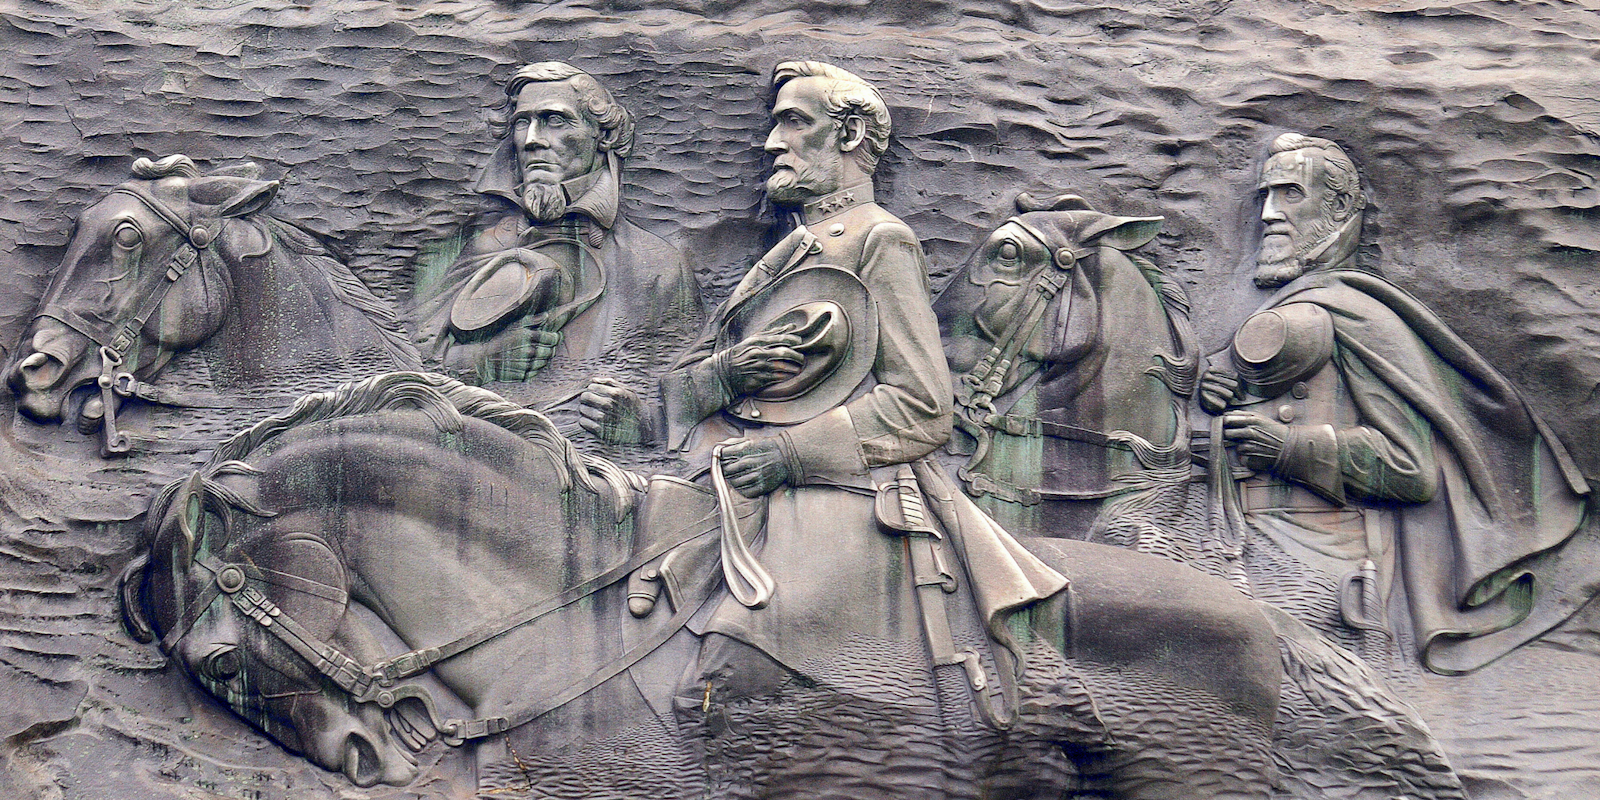 The Stone Mountain carving, an unfinished Confederate monument